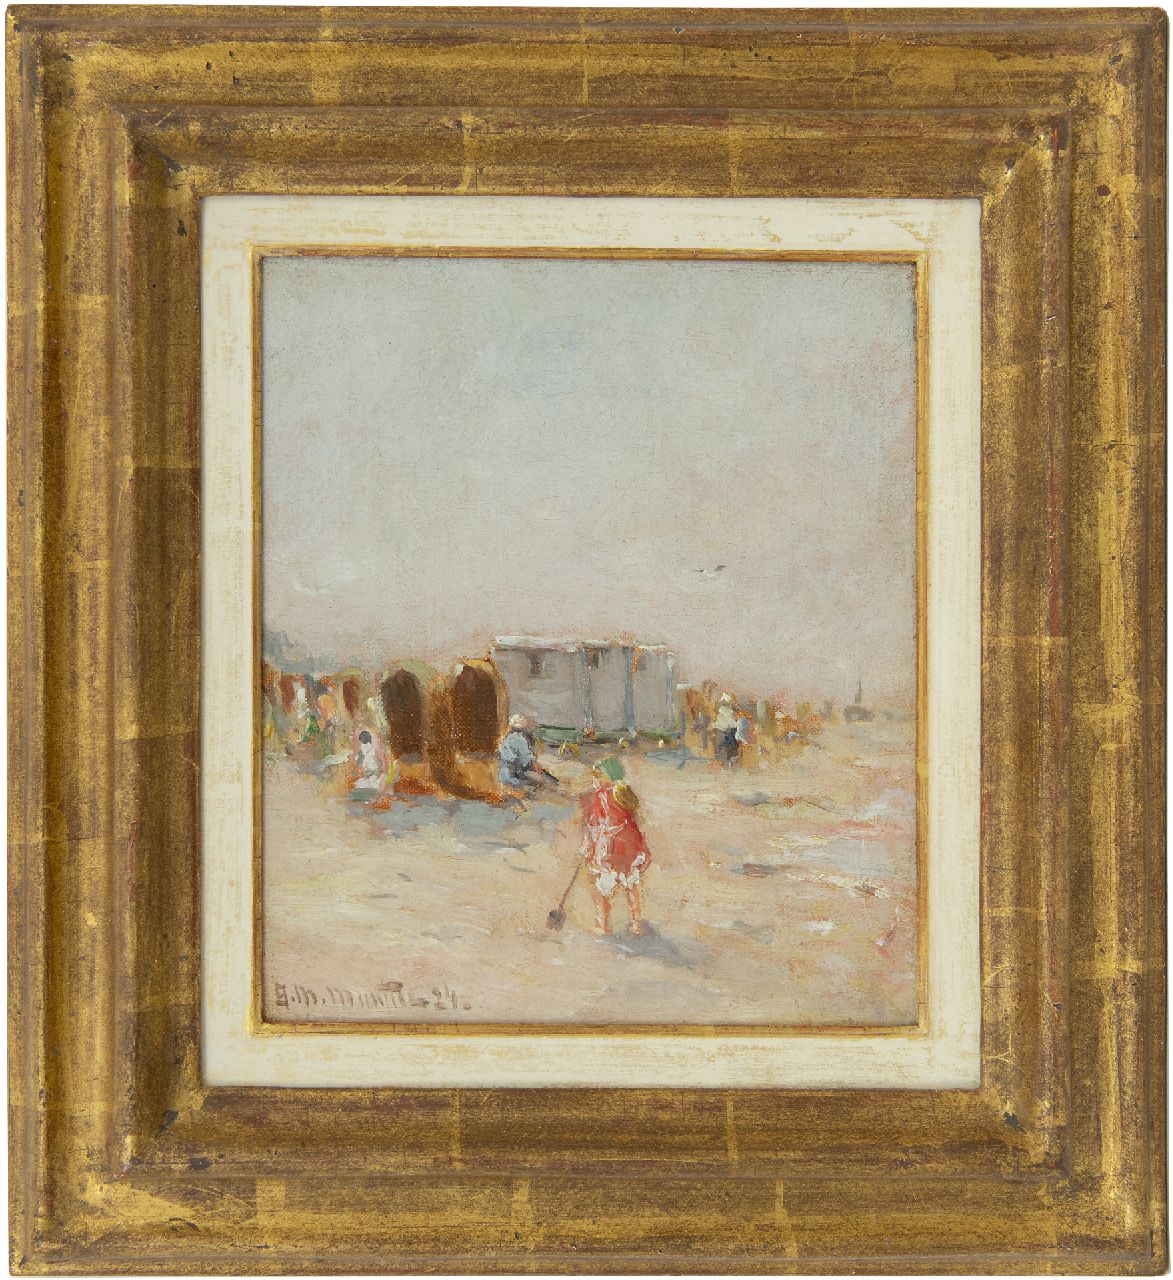 Munthe G.A.L.  | Gerhard Arij Ludwig 'Morgenstjerne' Munthe, Bathers and fisher folk on the beach, oil on canvas 22.6 x 19.5 cm, signed l.l. and dated '24